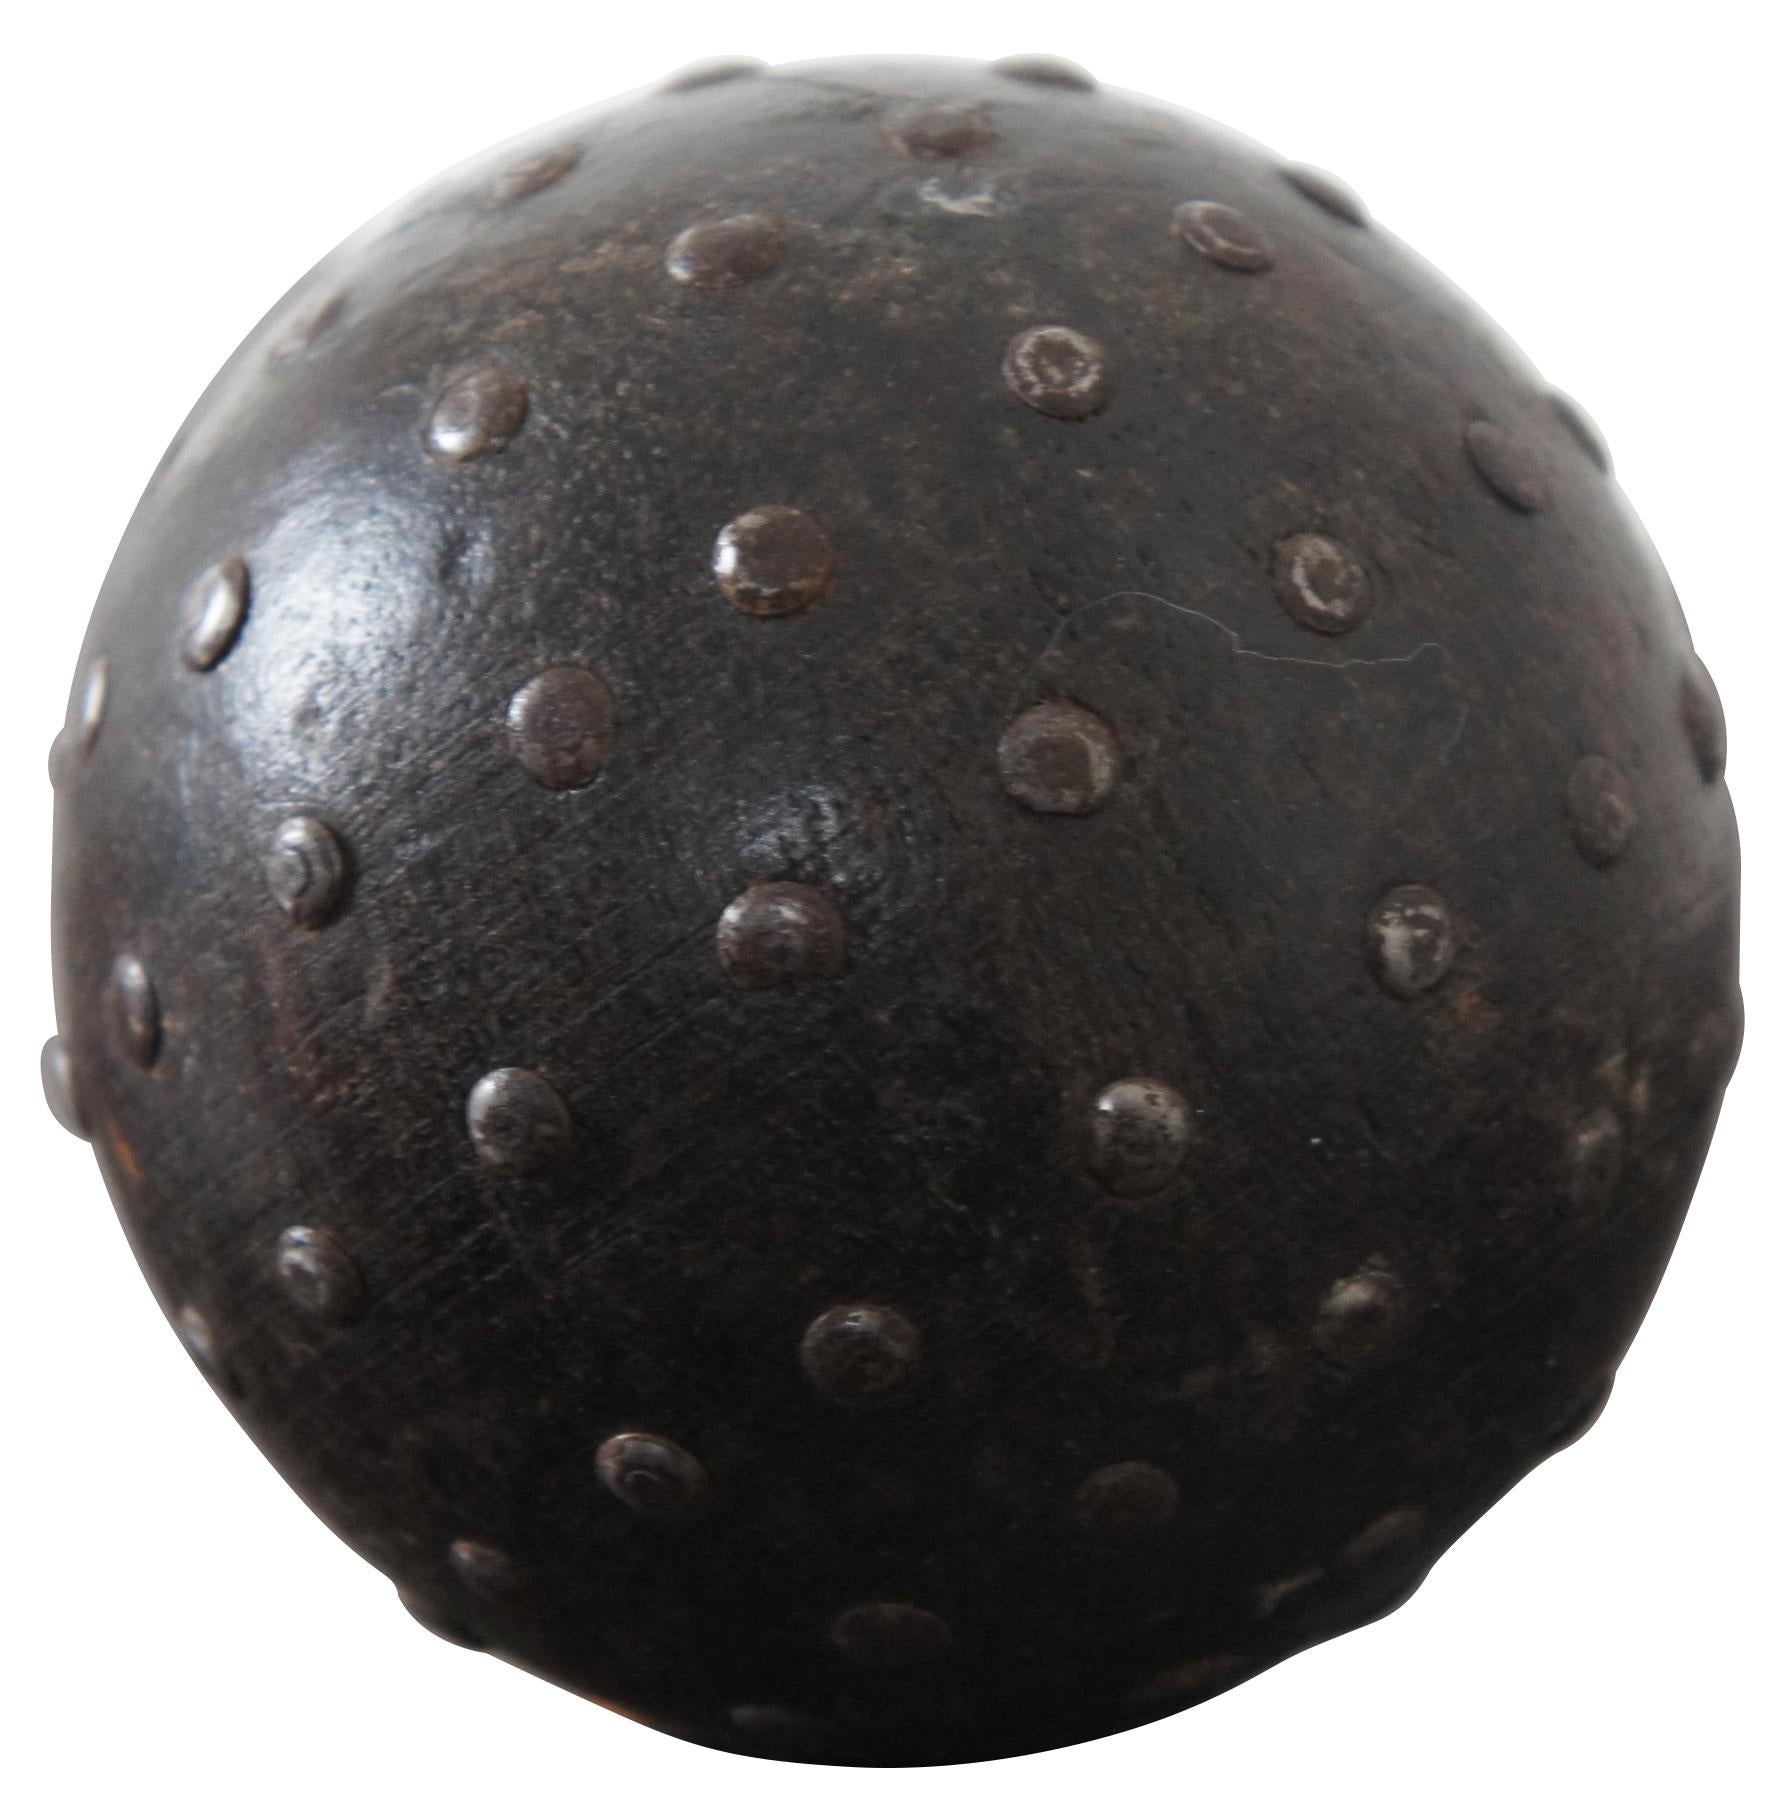 french ball used in bowls